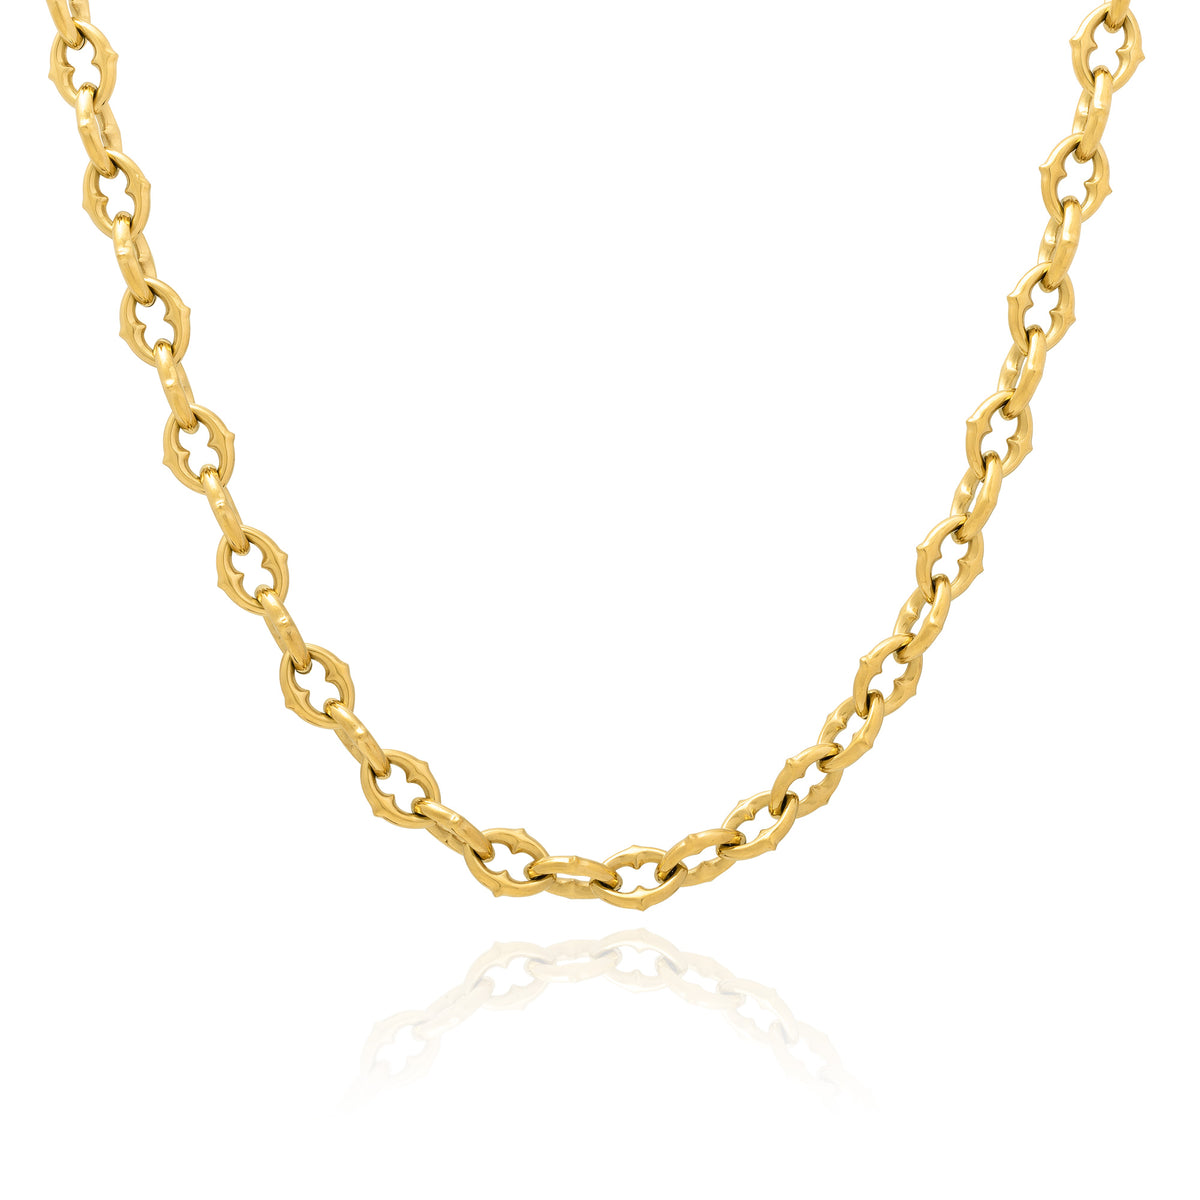 Thick gold spiked chain on white